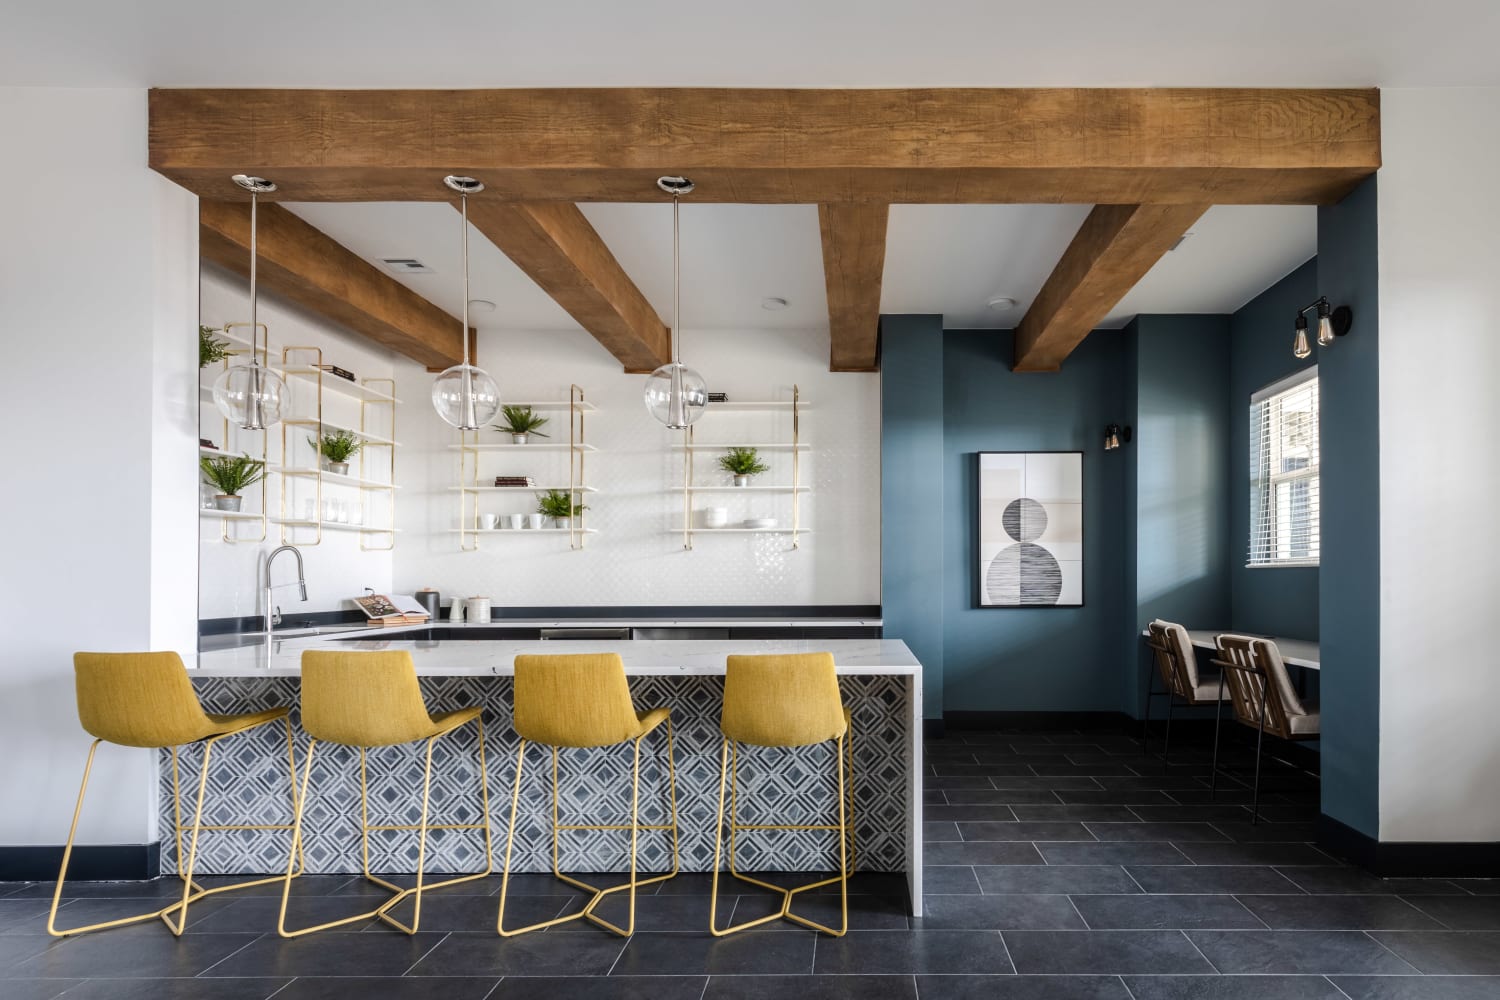 Clubhouse kitchen at Ladora Modern Apartments in Denver, Colorado